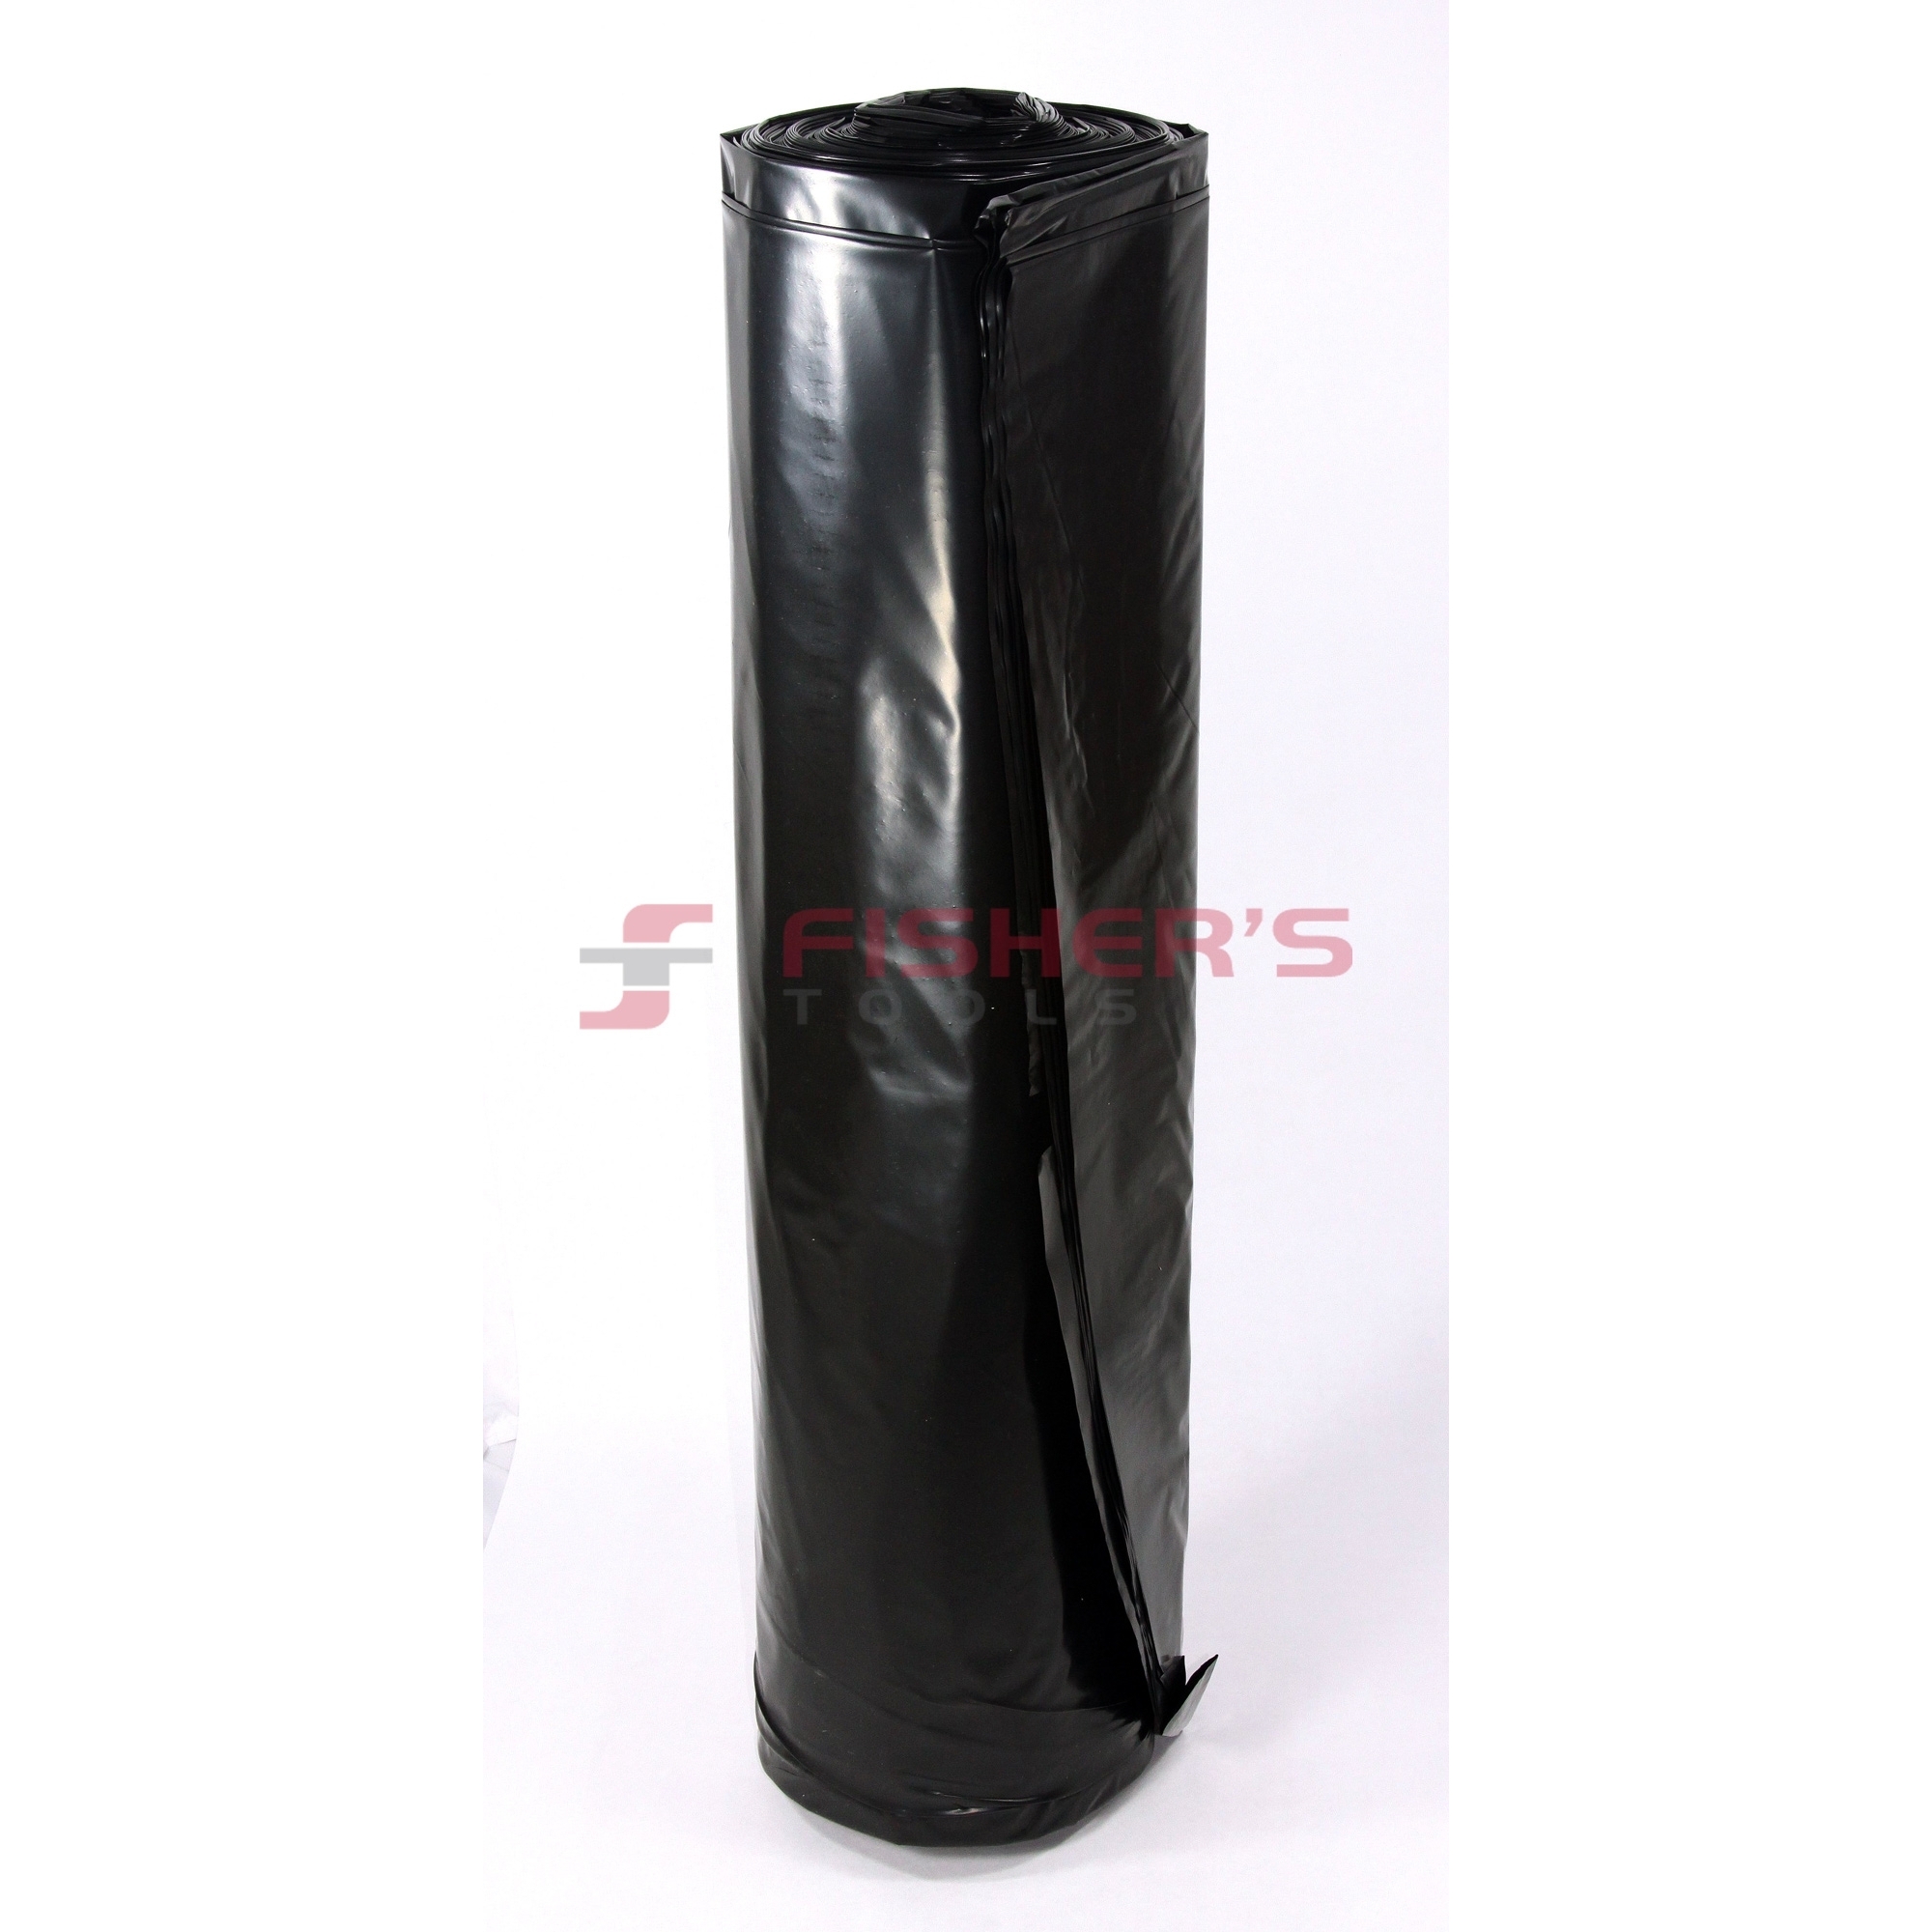 Poly-America 410B 10 ft X 10 ft 4 Mil Plastic Sheeting Black for sale online 